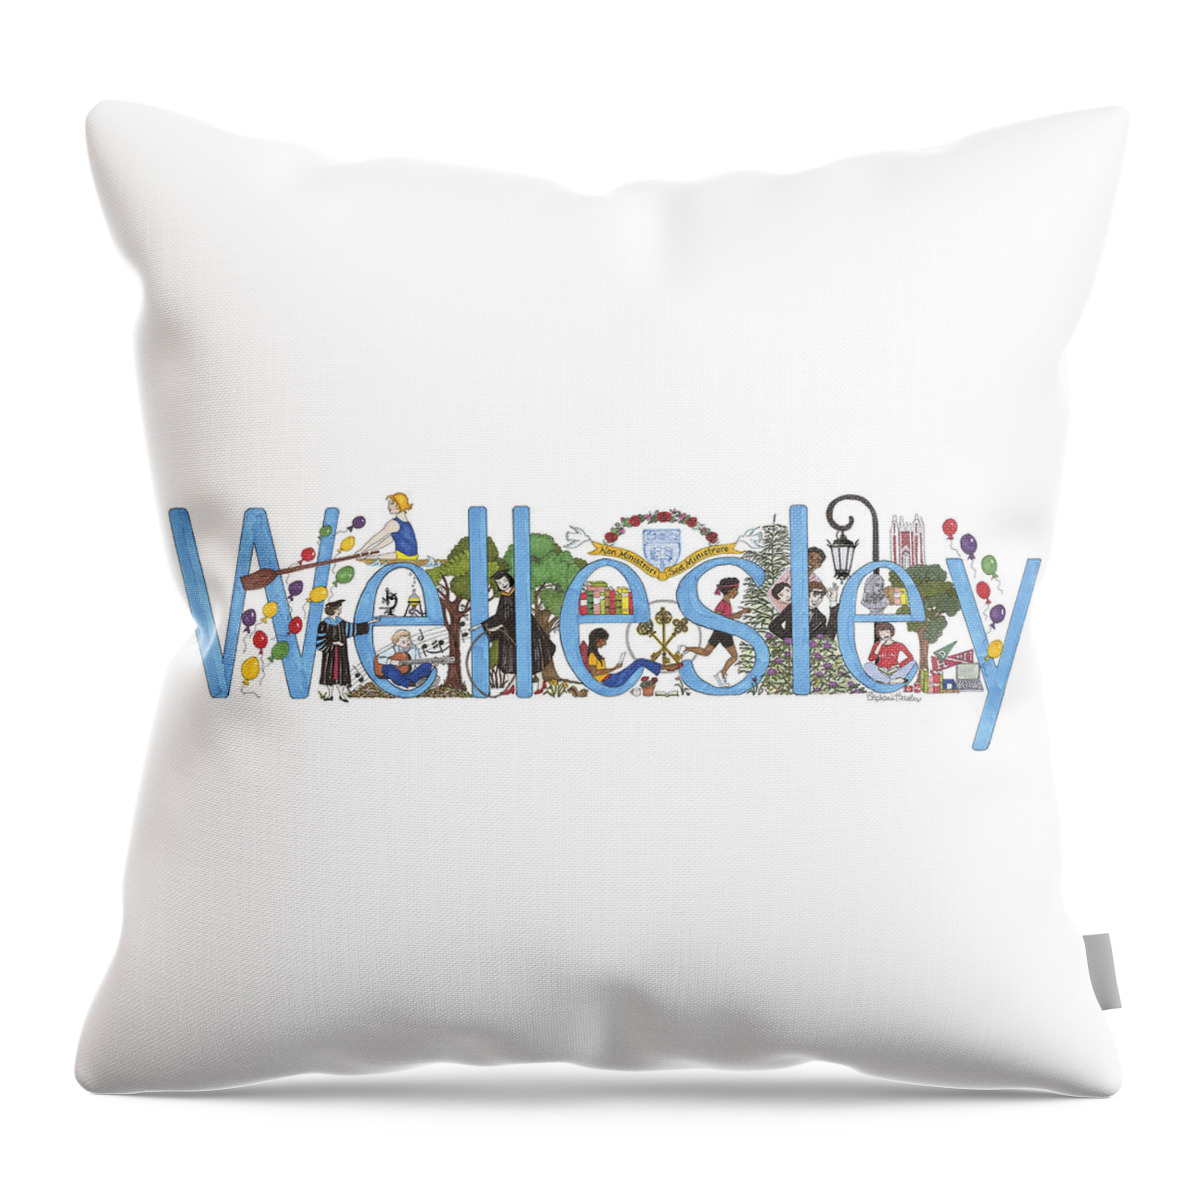 Wellesley College Throw Pillow featuring the mixed media Wellesley College by Stephanie Hessler